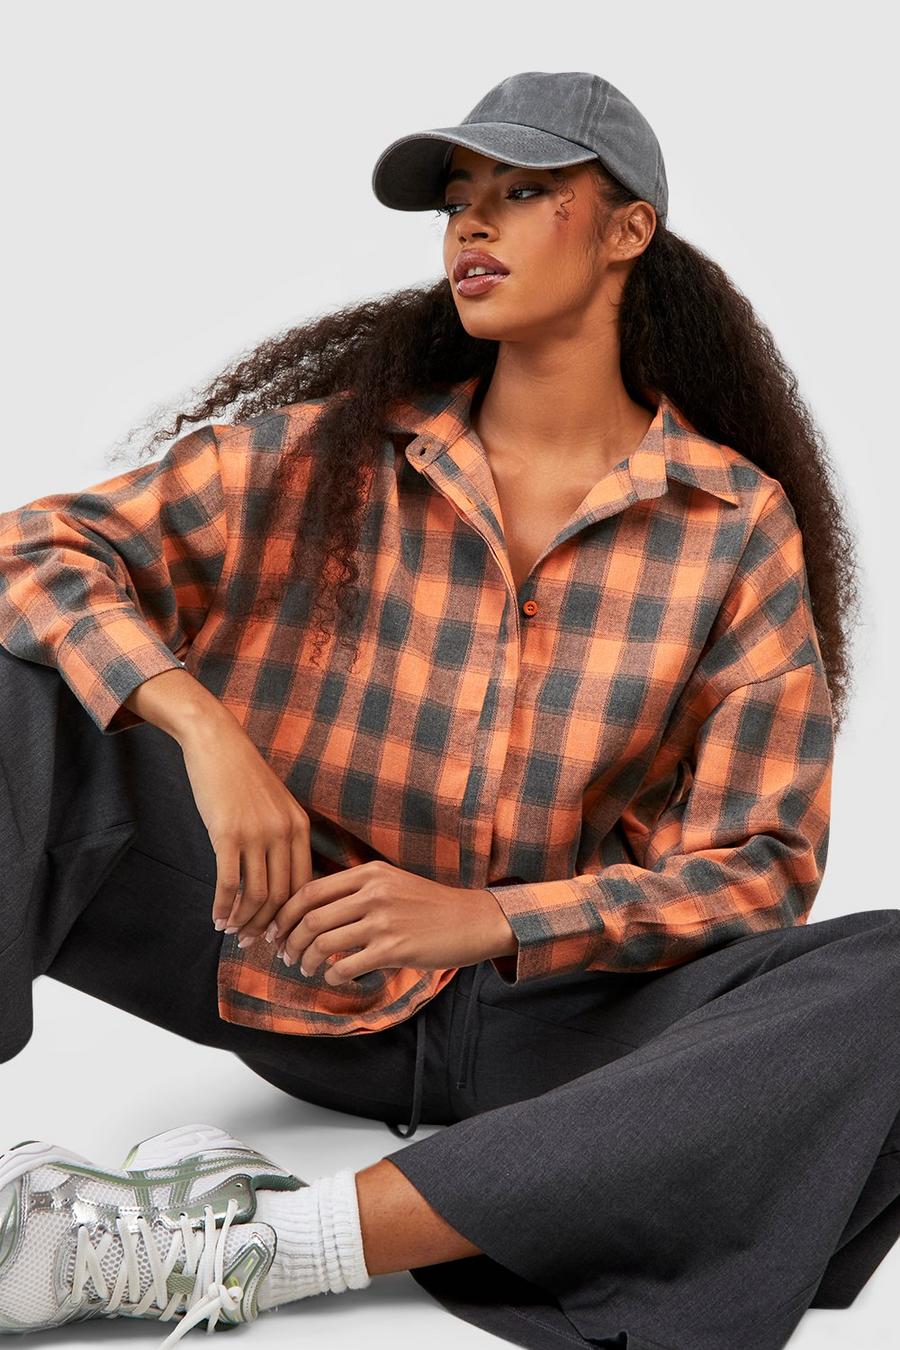 boohoo Plus Oversized Flannel Shirt - Red - Size 20